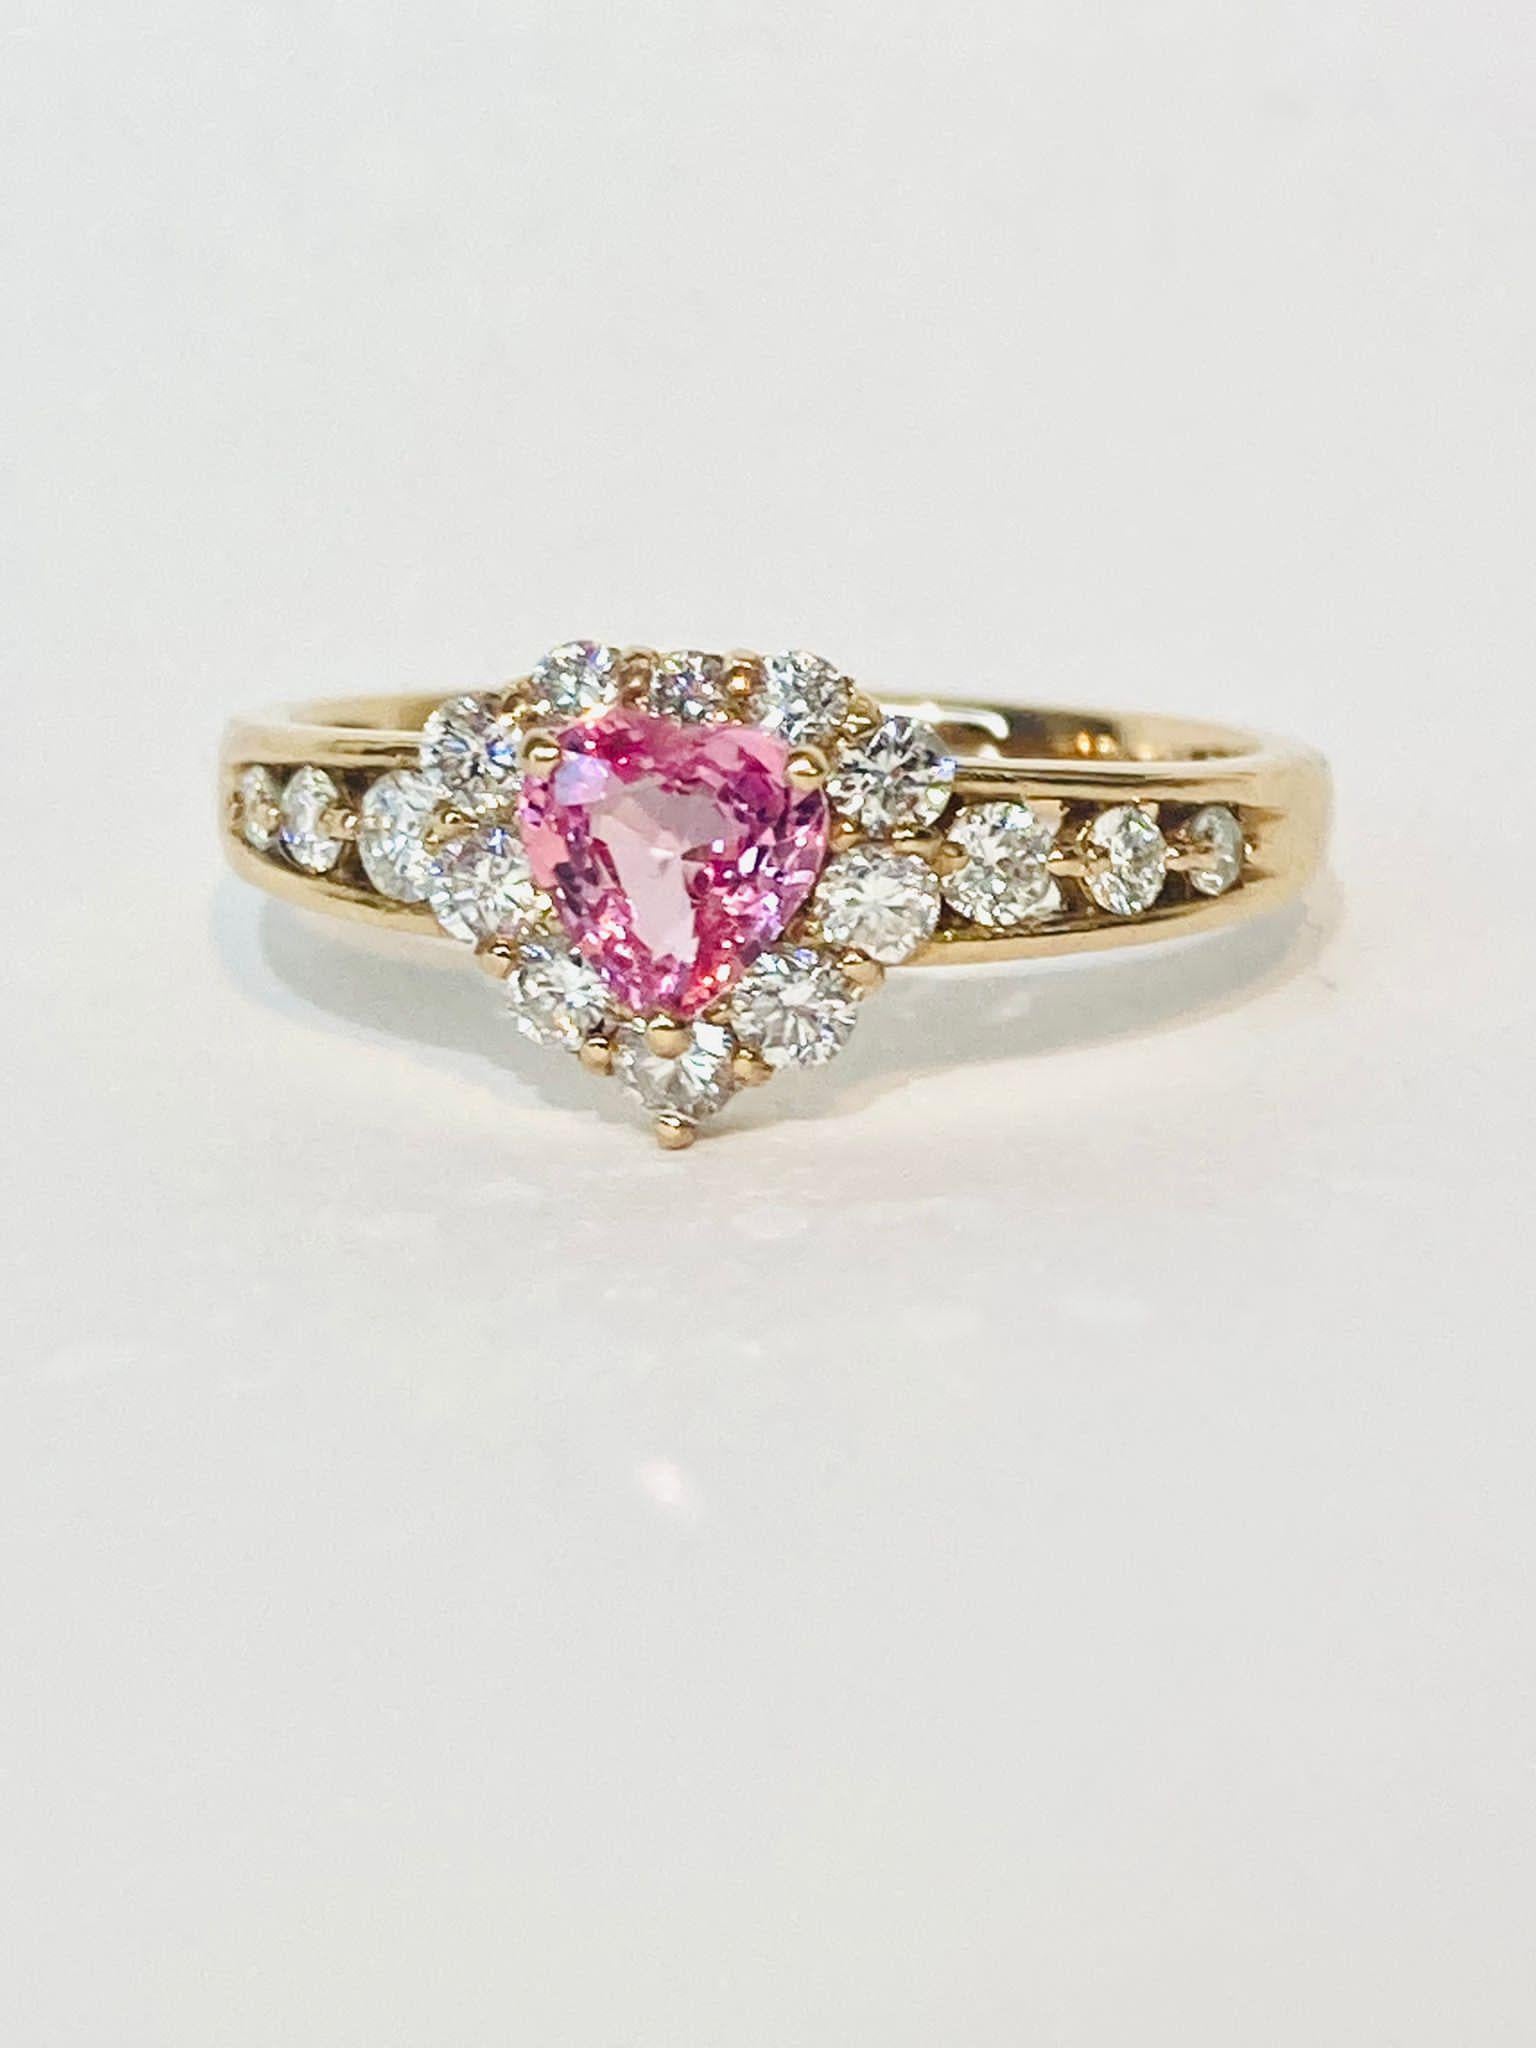 Bochic “Padparadscha” Pink Sapphire & Diamond Cluster 18K Gold Ring 

Natural Pink Padparadscha Sapphire 0.50 Carat 
Diamonds 0.66 Carat 
F color 
VS clarity 
18K Yellow Gold
3 Gram

This Ring is from the 